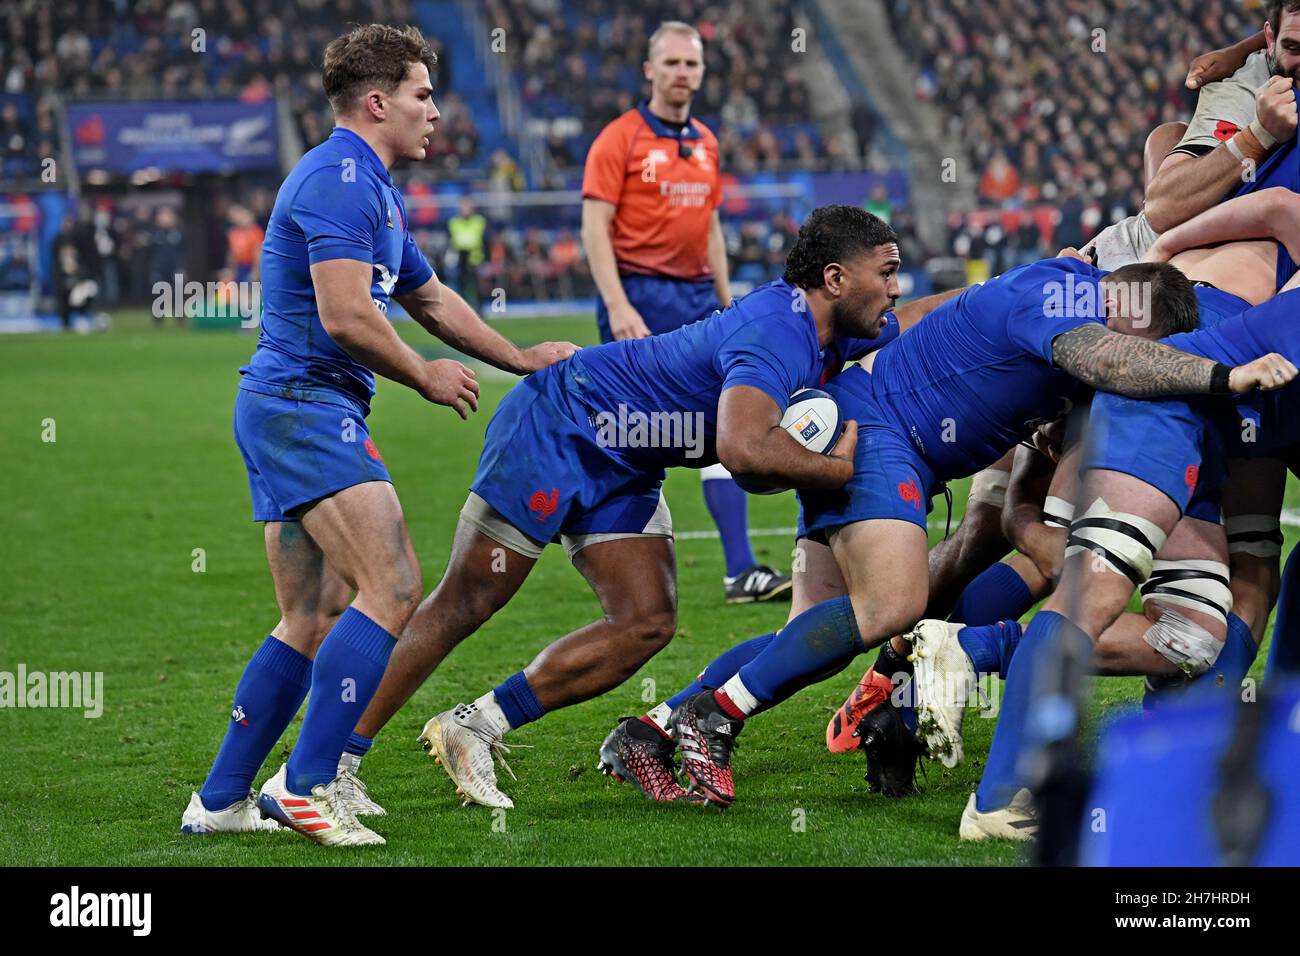 France National Rugby scrum-half Antoine Dupont (#9) in action during a fixture between New Zealand All Blacks and France at Rugby Autumn Internationa Stock Photo